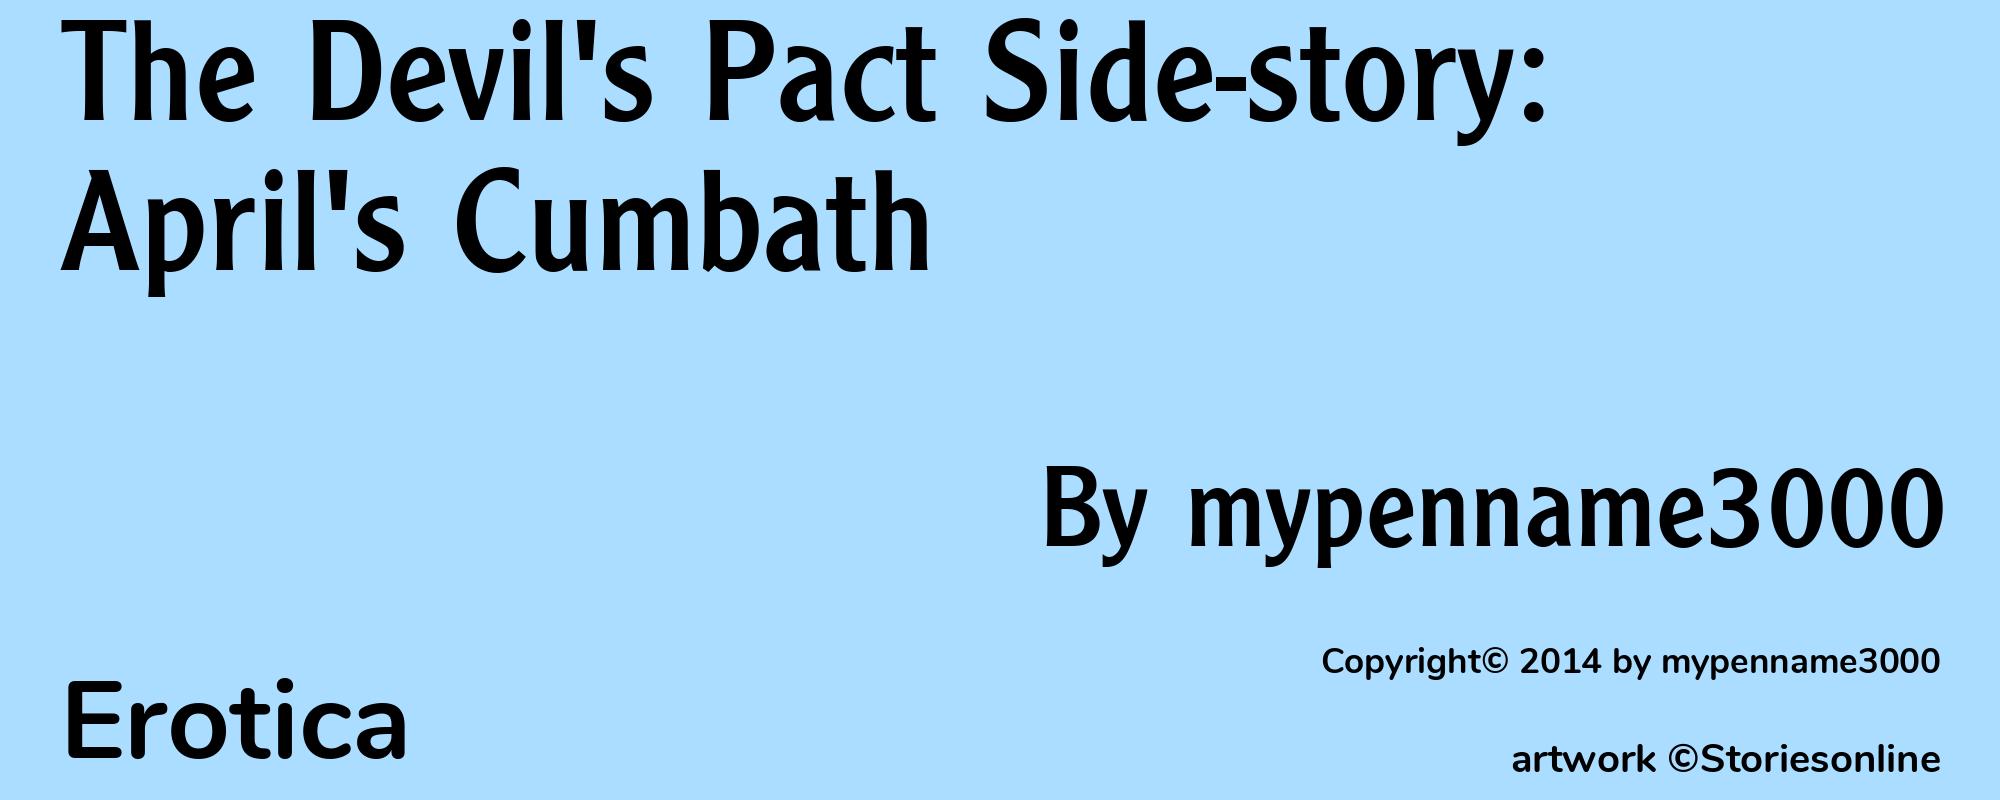 The Devil's Pact Side-story: April's Cumbath - Cover